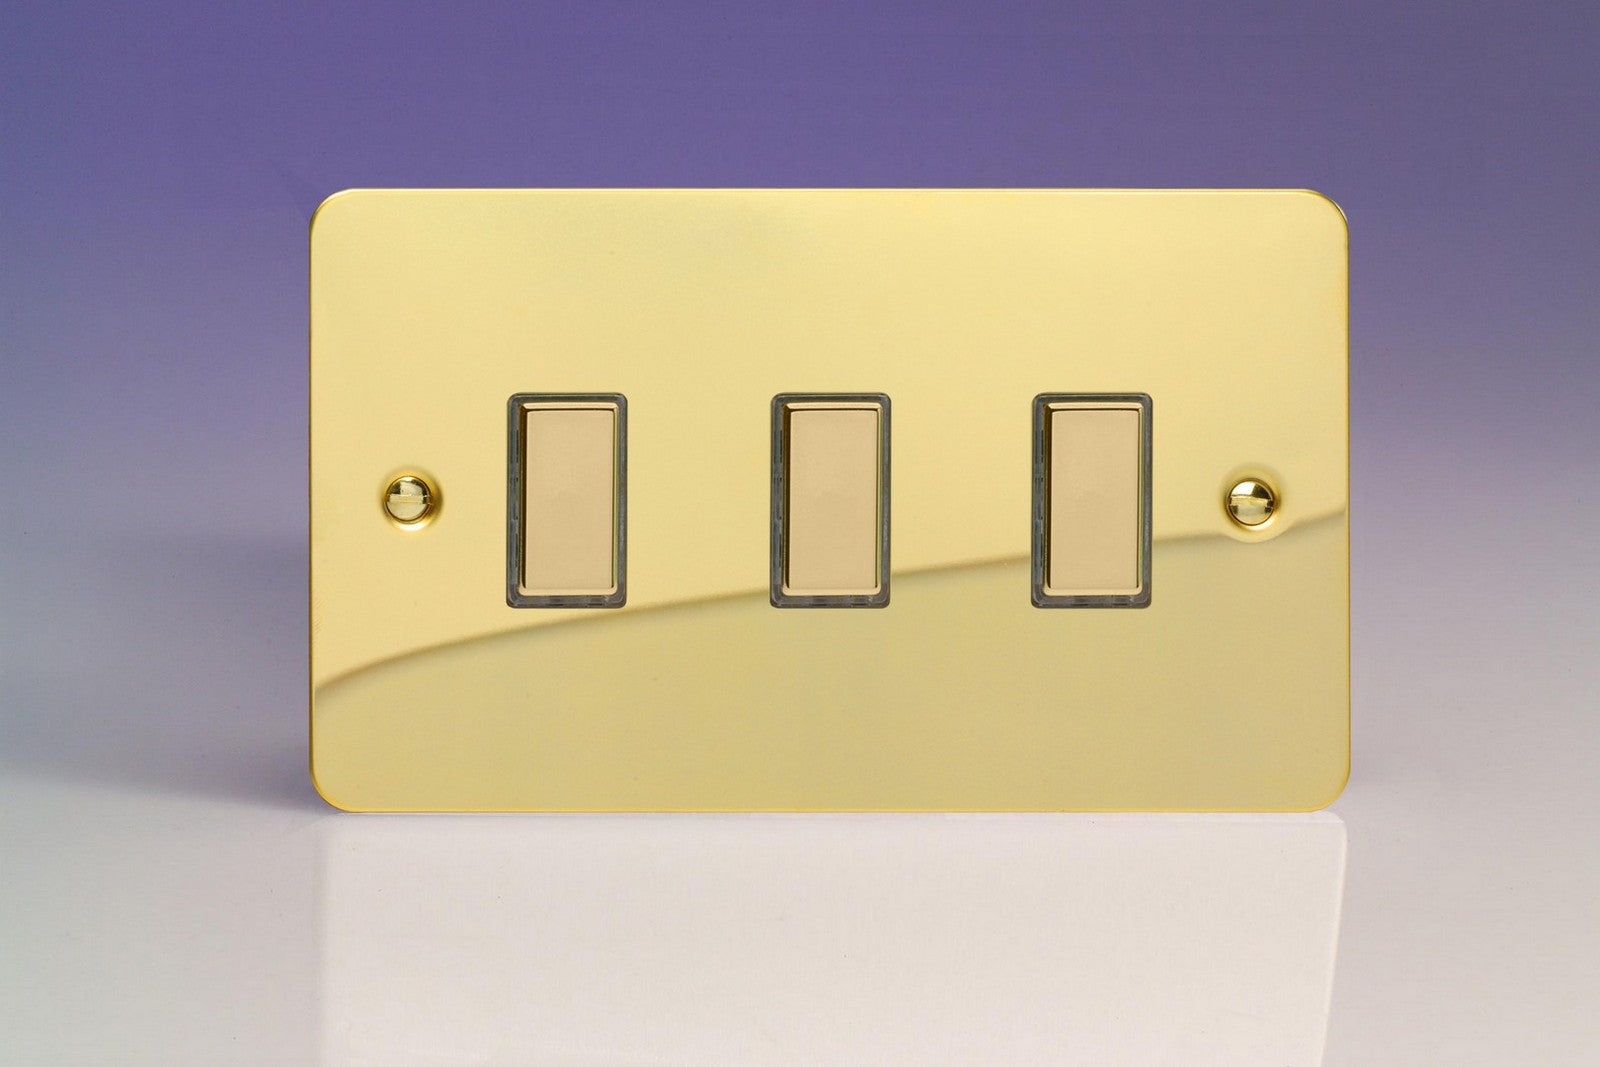 Varilight JFVES003 Ultraflat Polished Brass 3-Gang Tactile Touch Control Dimming Slave for use with Multi-Point Touch or Remote Master on 2-Way Circuits (Twin Plate)